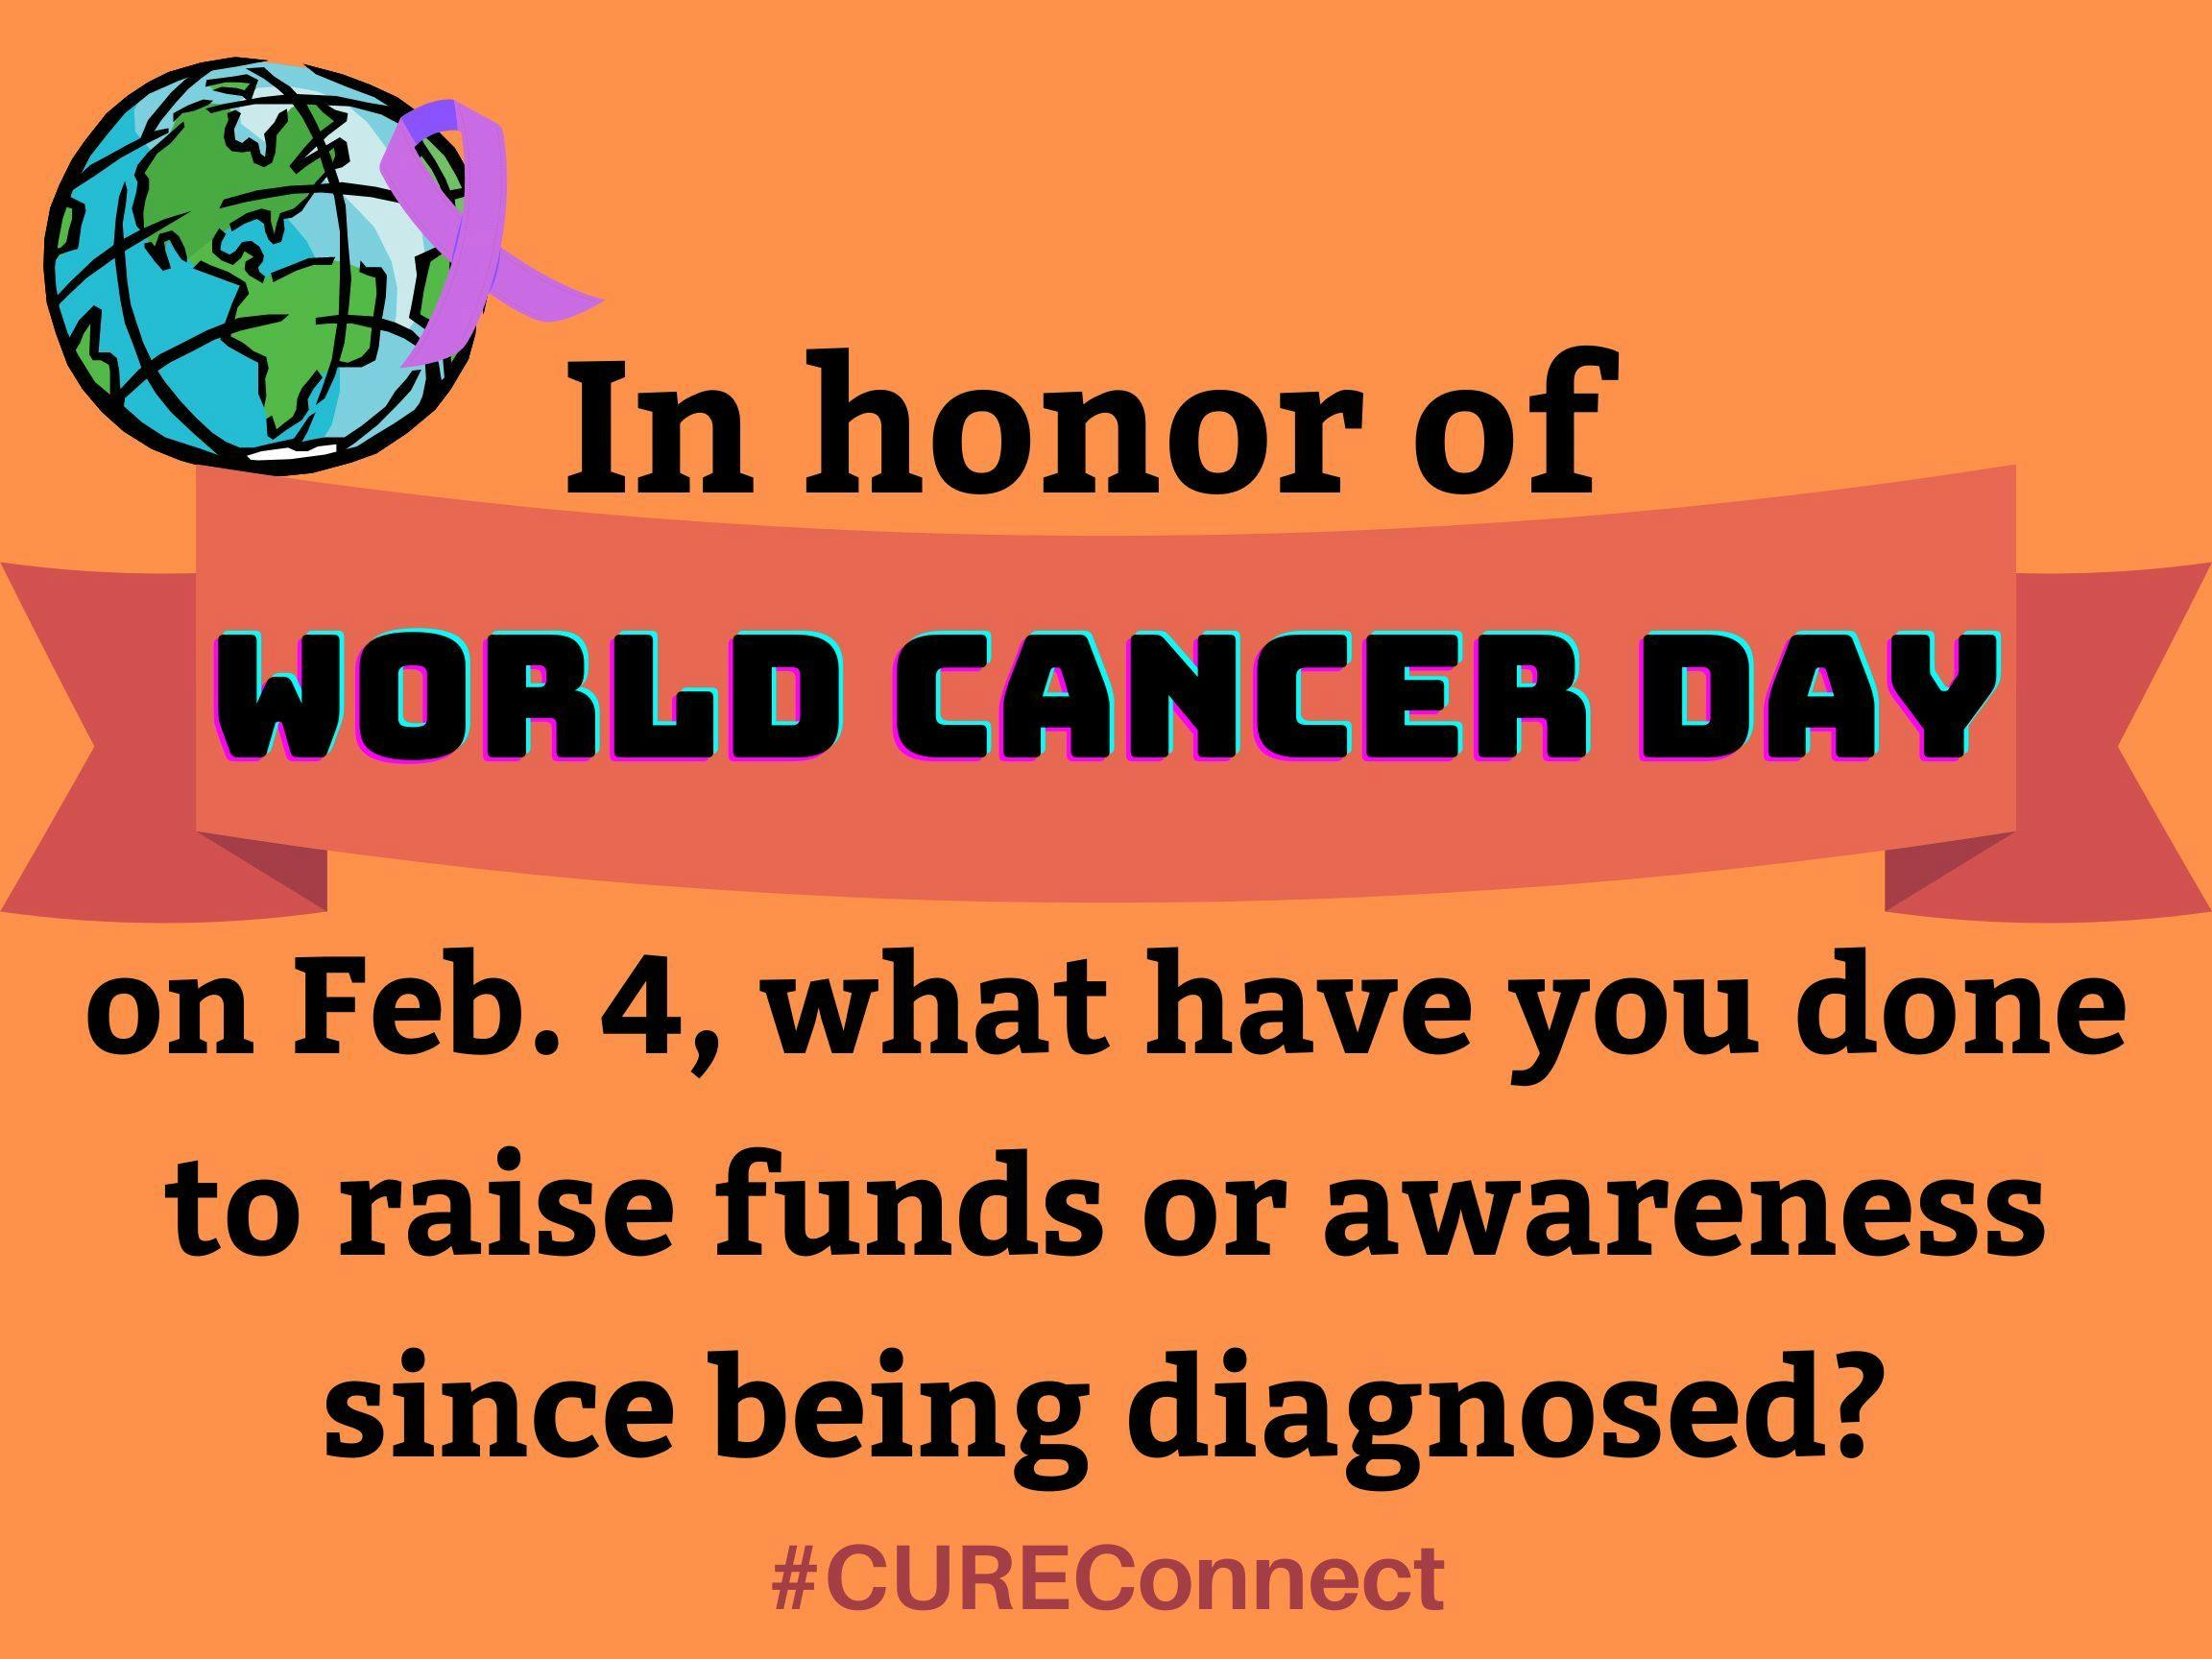 In honor of World Cancer Day on Feb. 4, what are you doing to raise funds or awareness since being diagnosed?